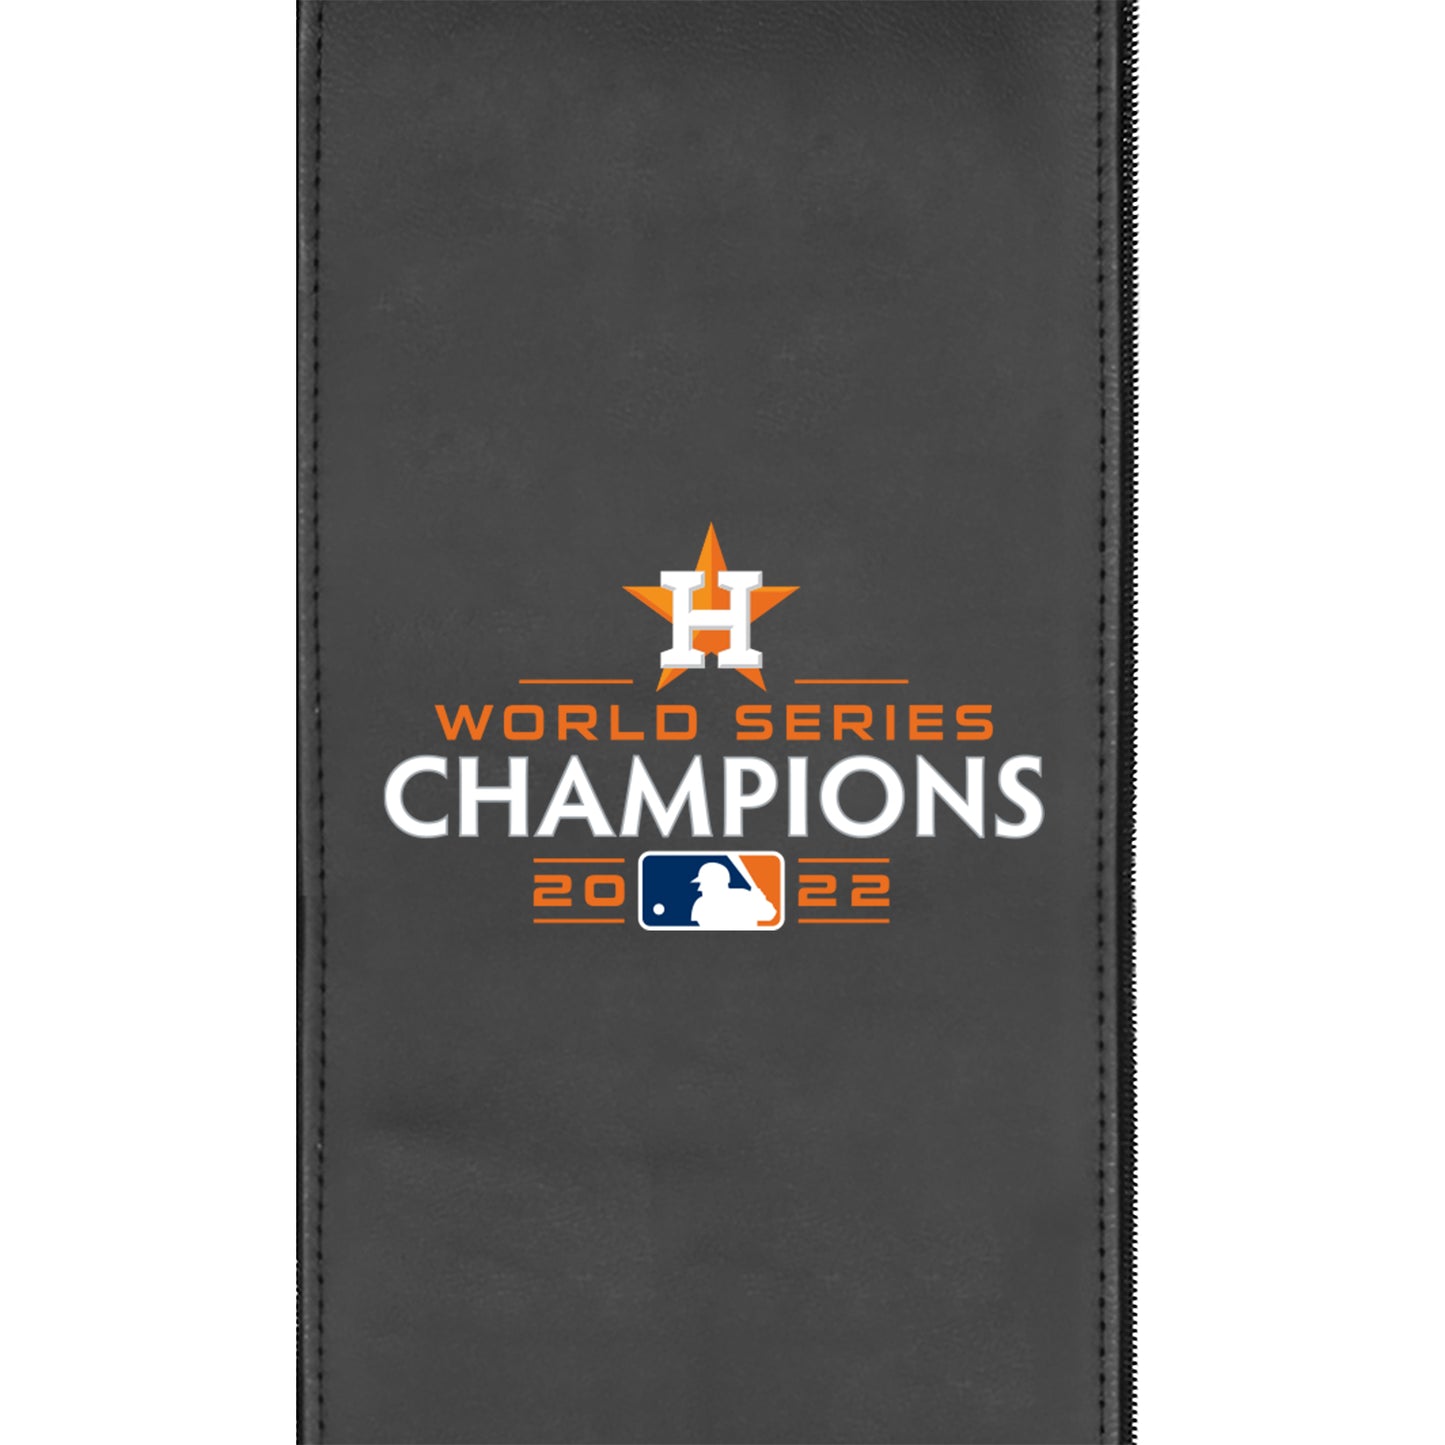 Stealth Power Plus Recliner with Houston Astros 2022 Champions